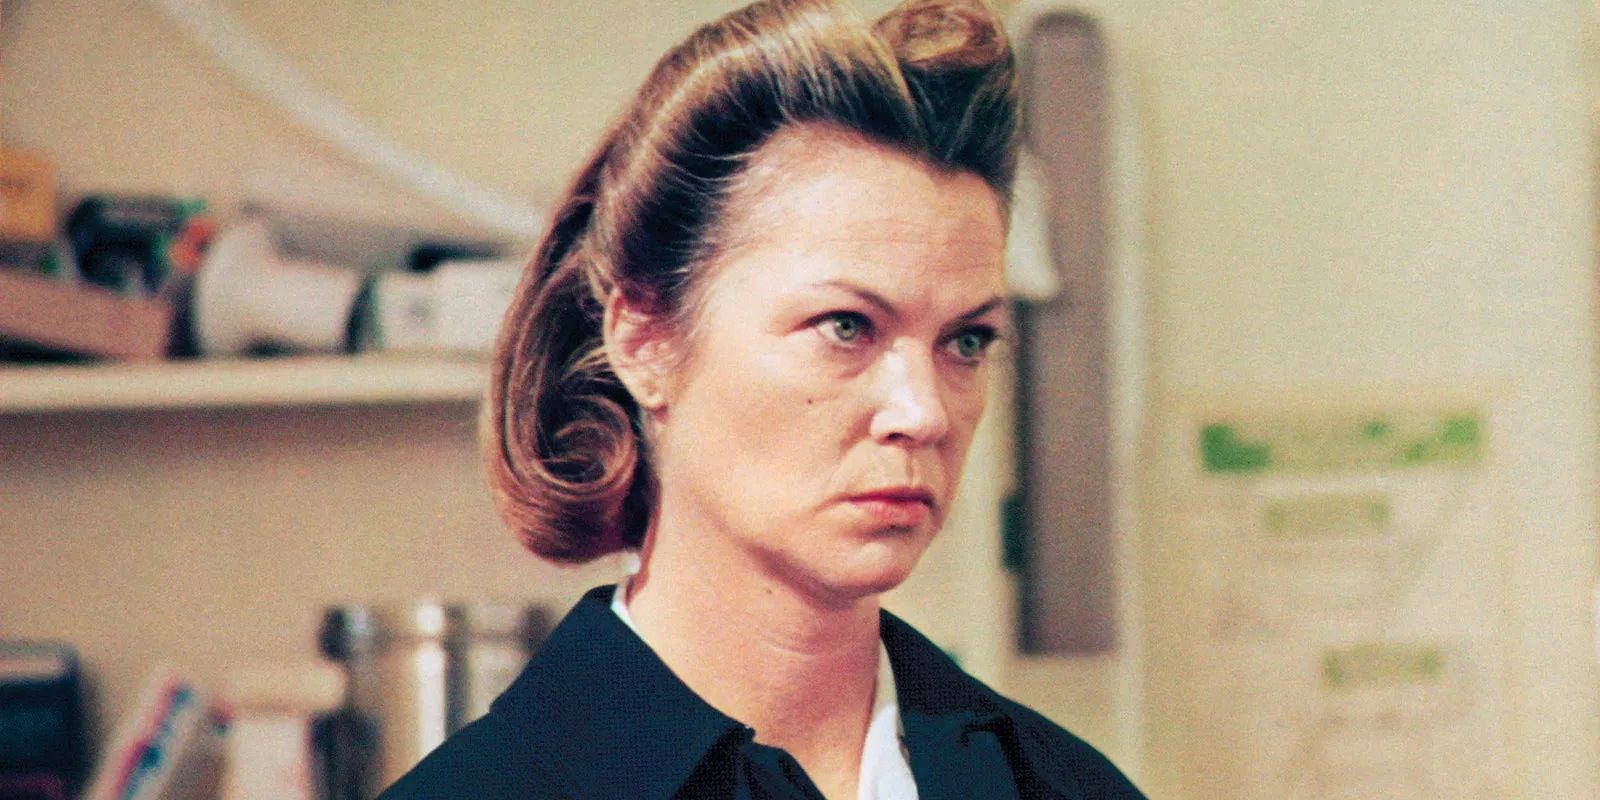 Louise Fletcher as Ratched in One Flew Over the Cuckoo's Nest